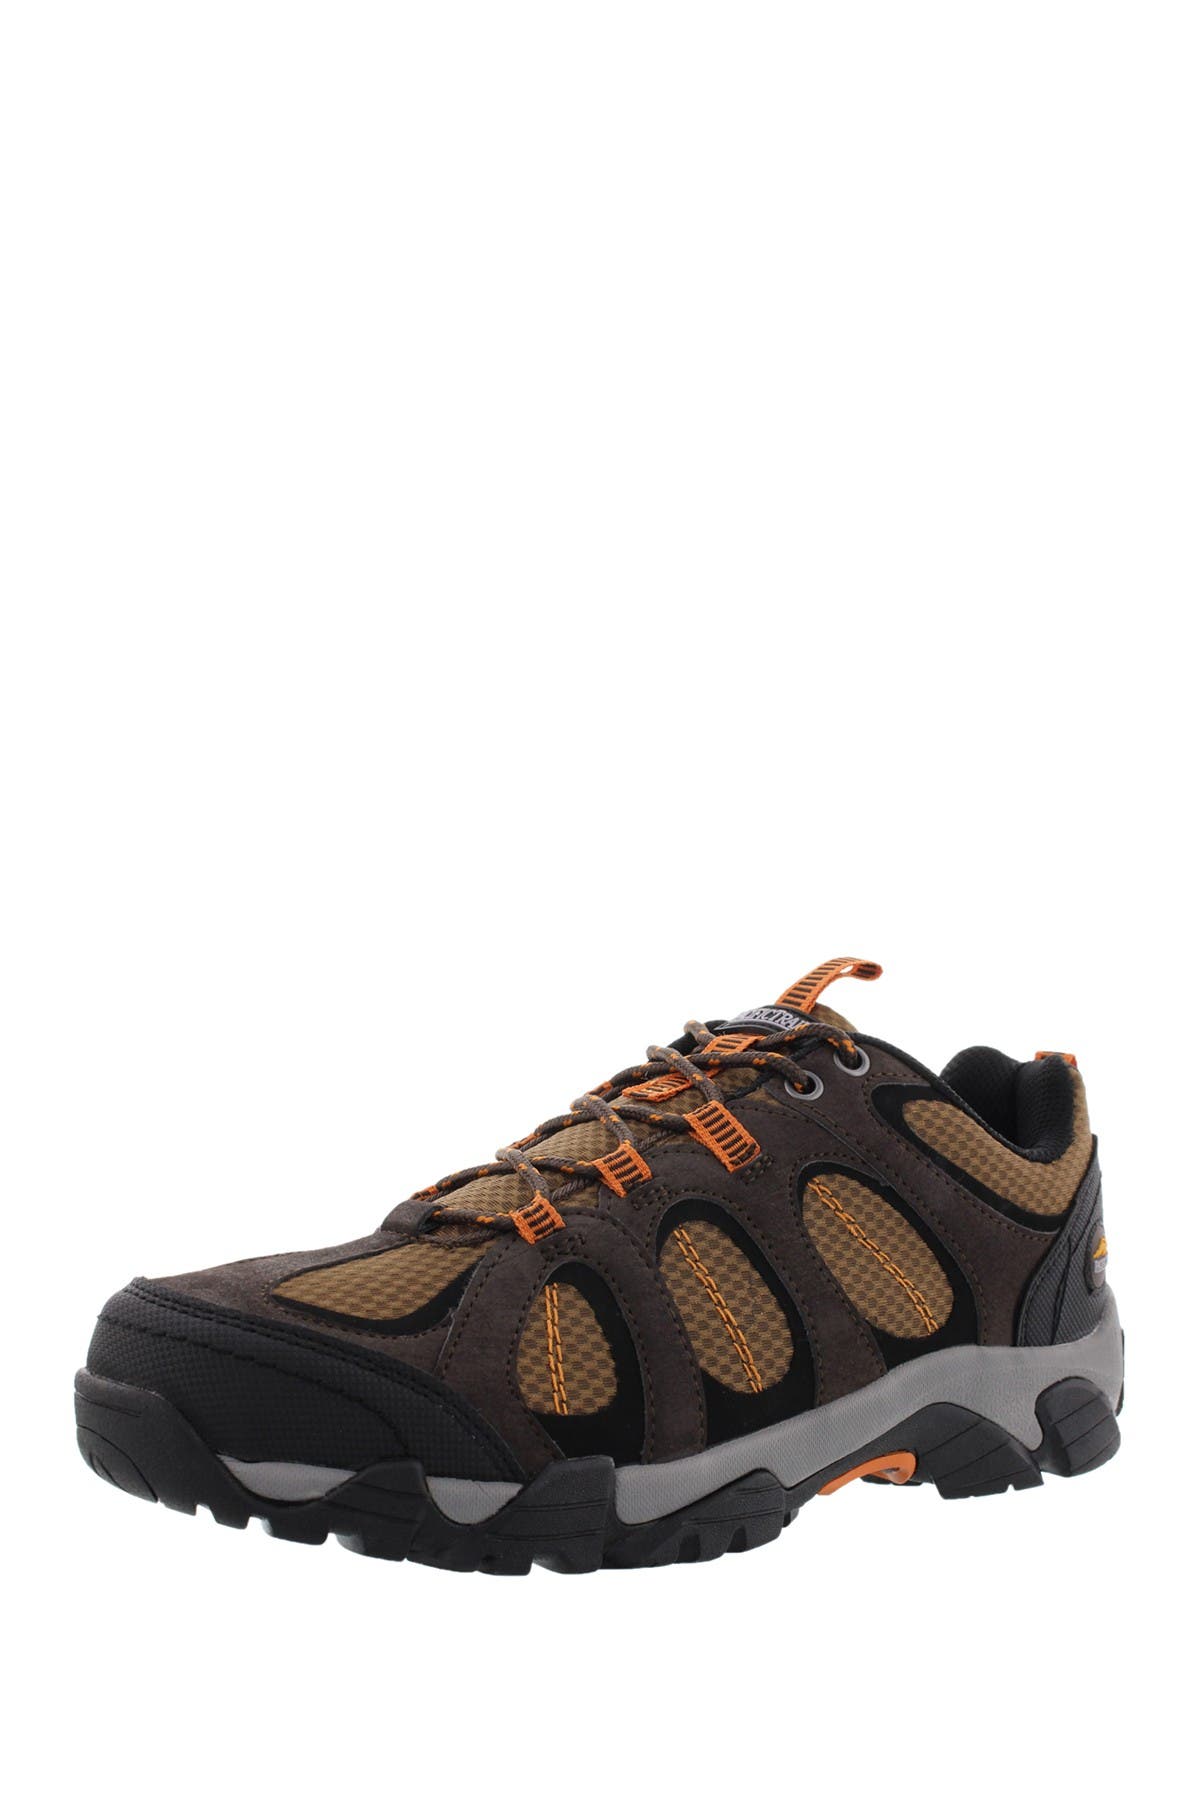 pacific trail hiking shoes